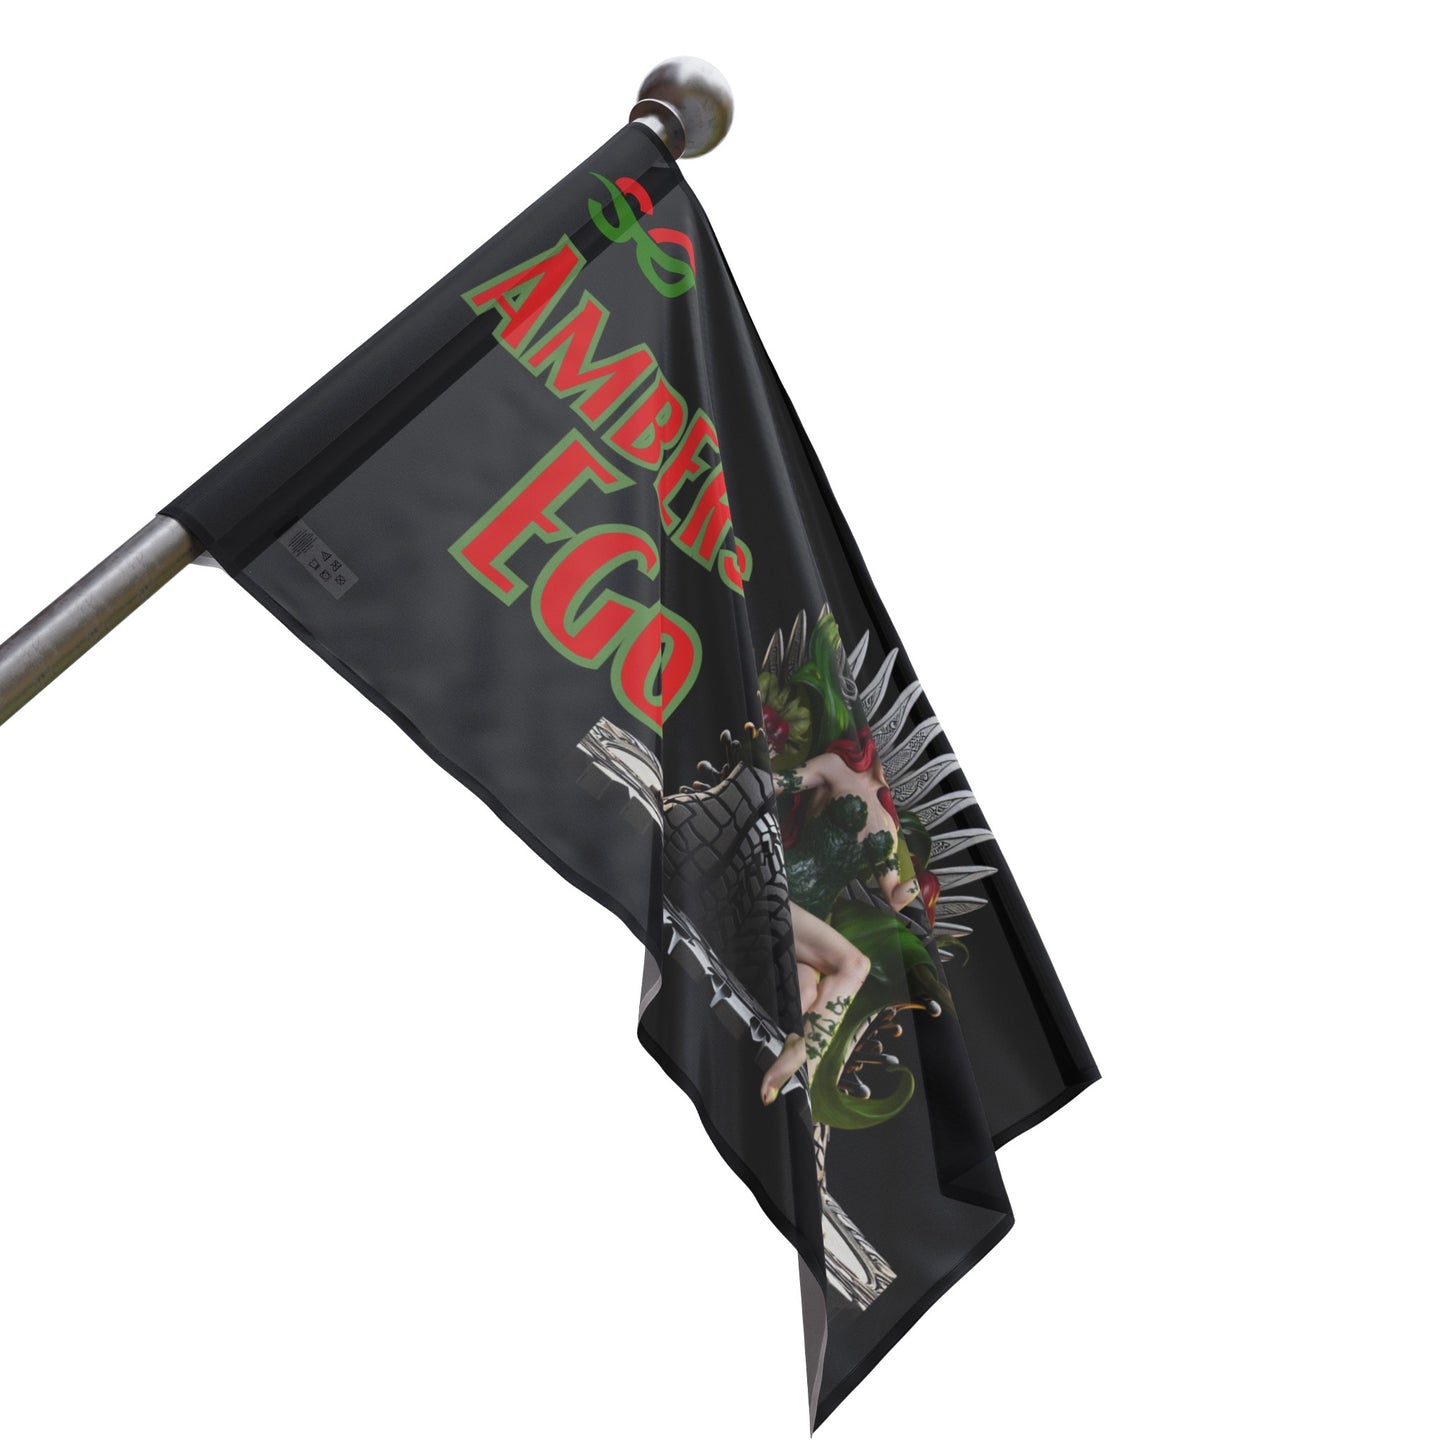 a black and green flag with an image of a demon on it